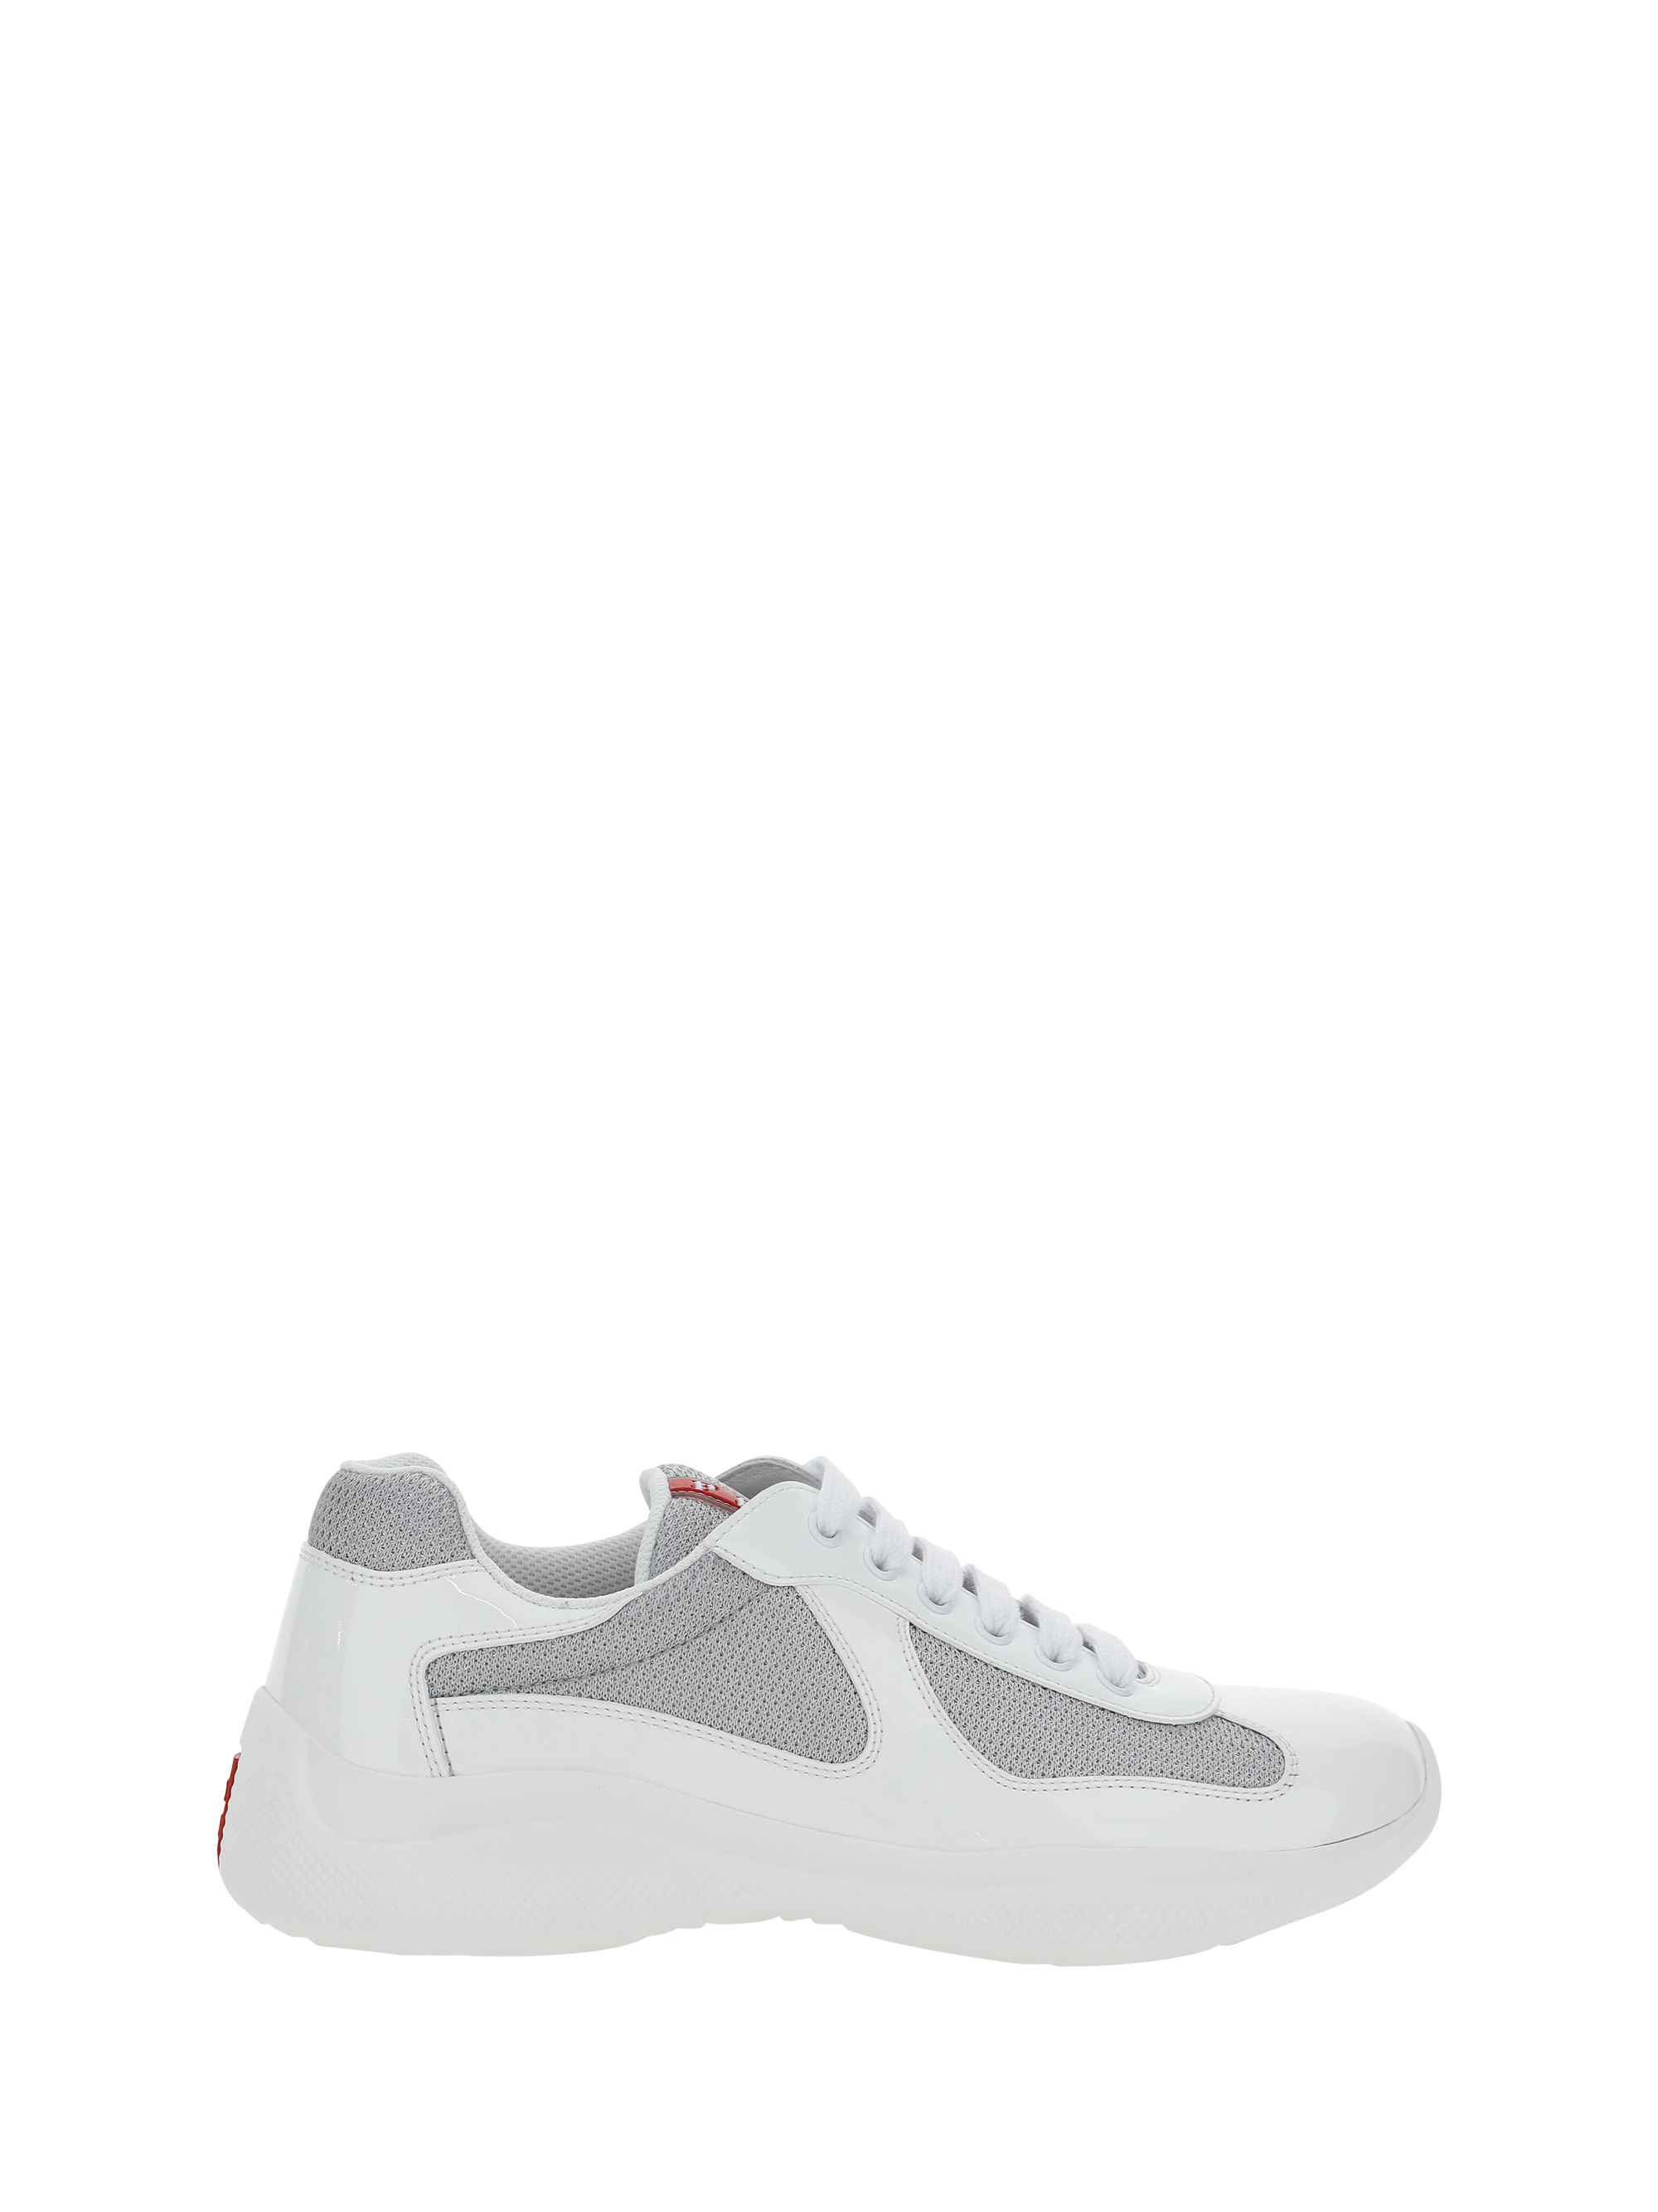 Shop Prada New America's Cup Sneakers In Bianco+argento